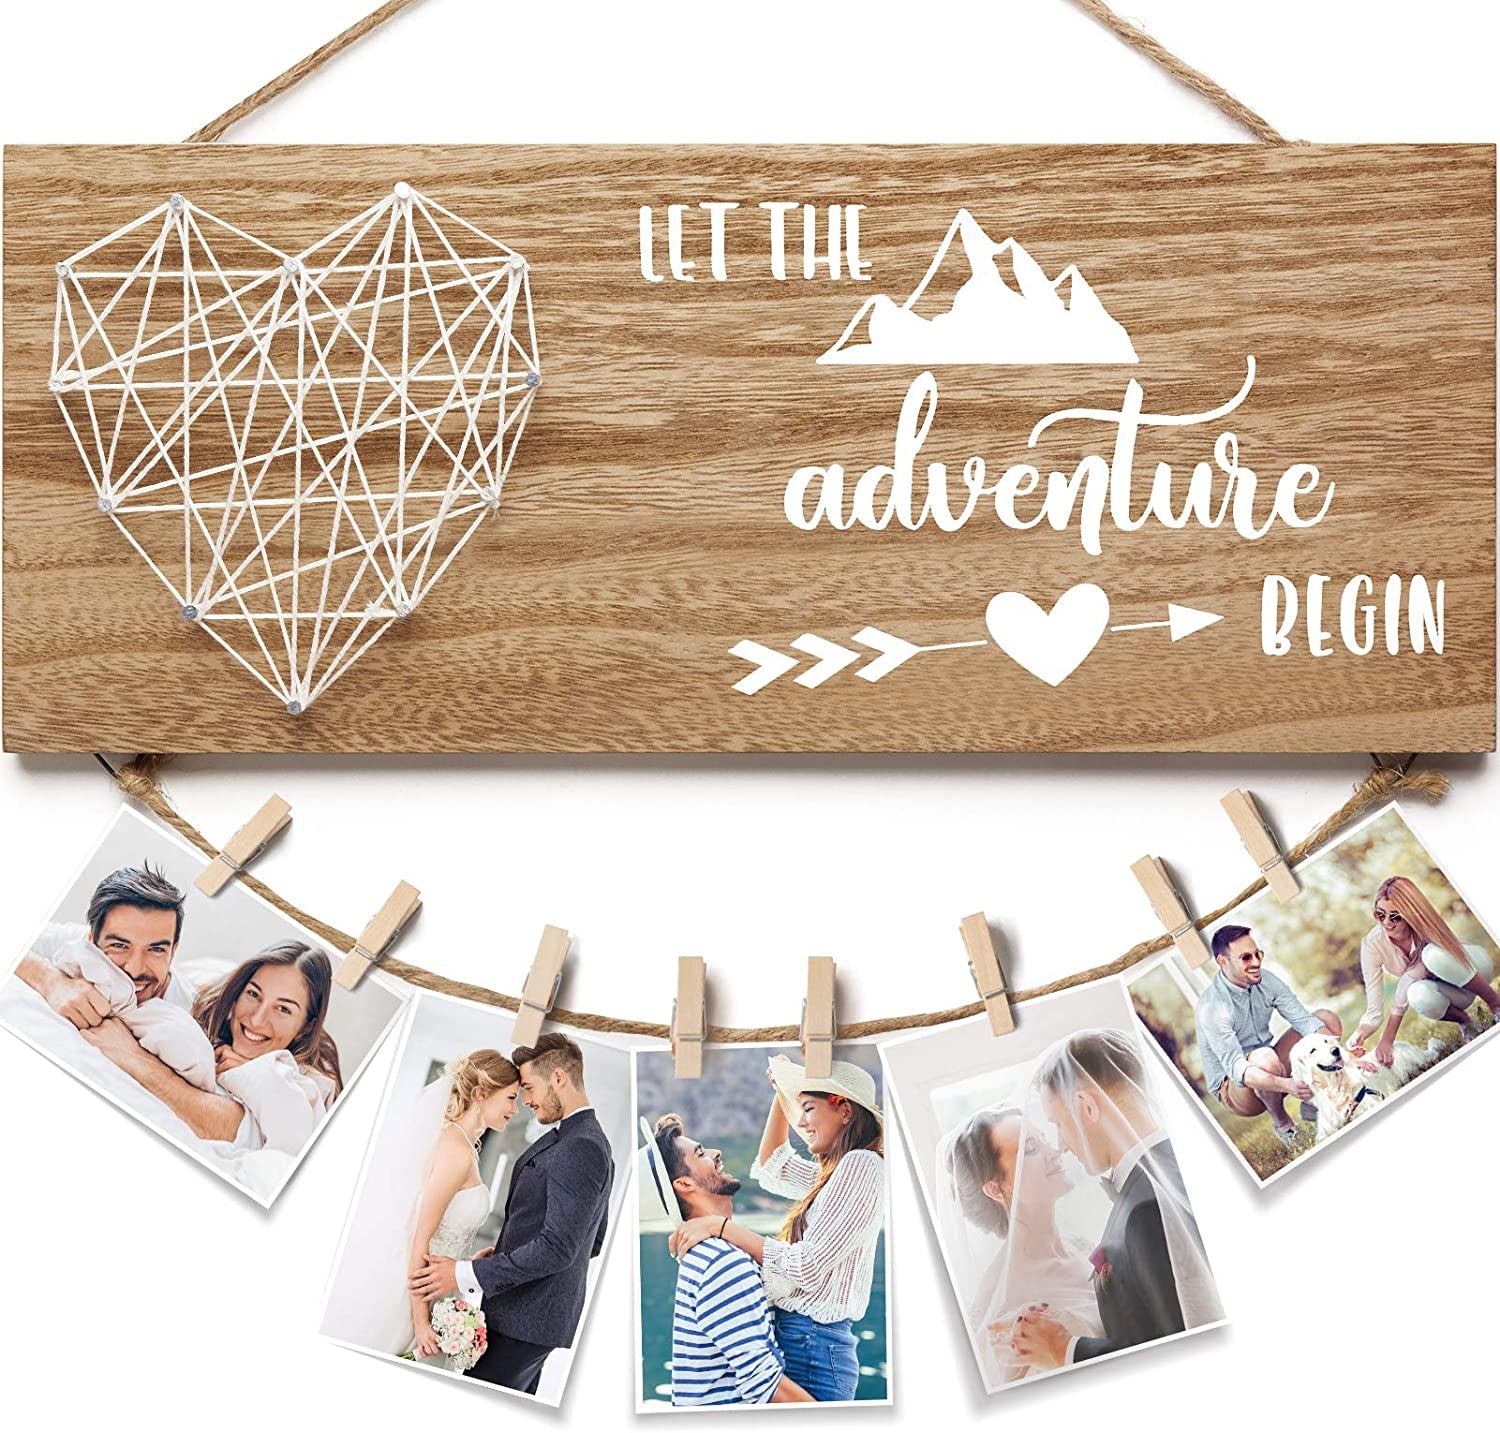  Gifts for Engaged Couples